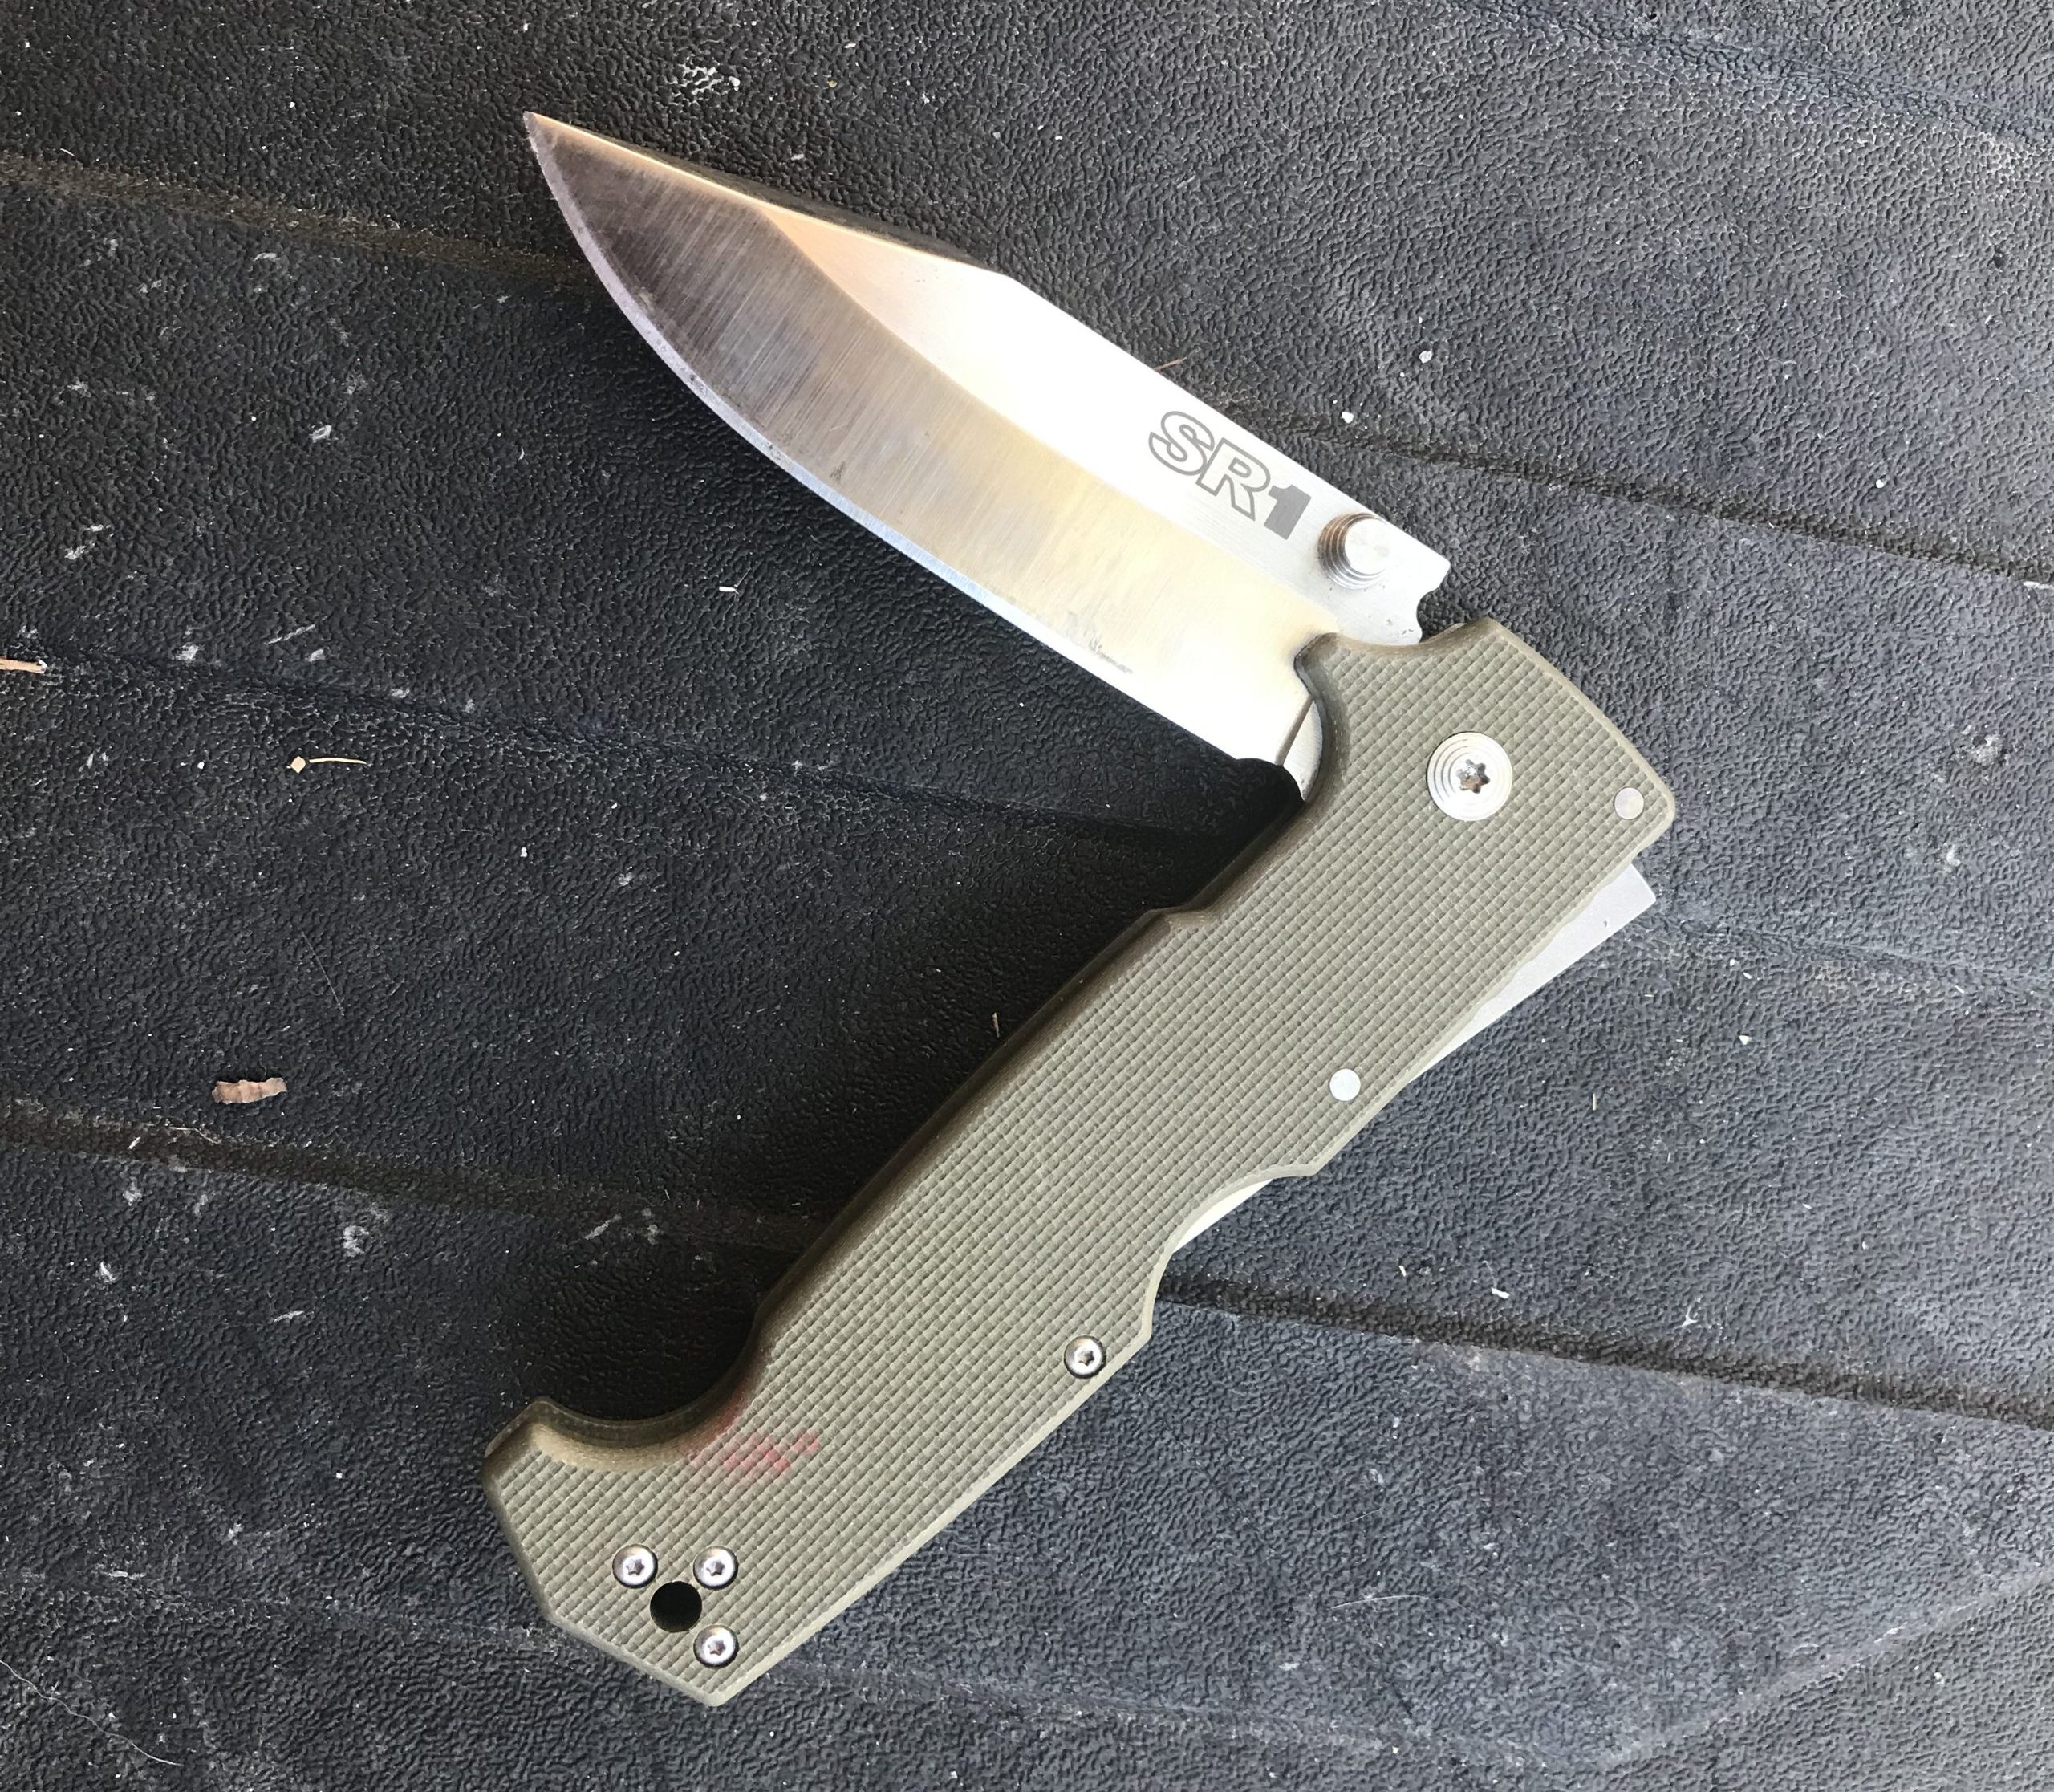 The Cold Steel SR1's blade is a solid 4 inch slab of 1/4" S35VN. This is a knife that is meant for hard use, but it isn't so big that it feels obtrusive in the pocket.